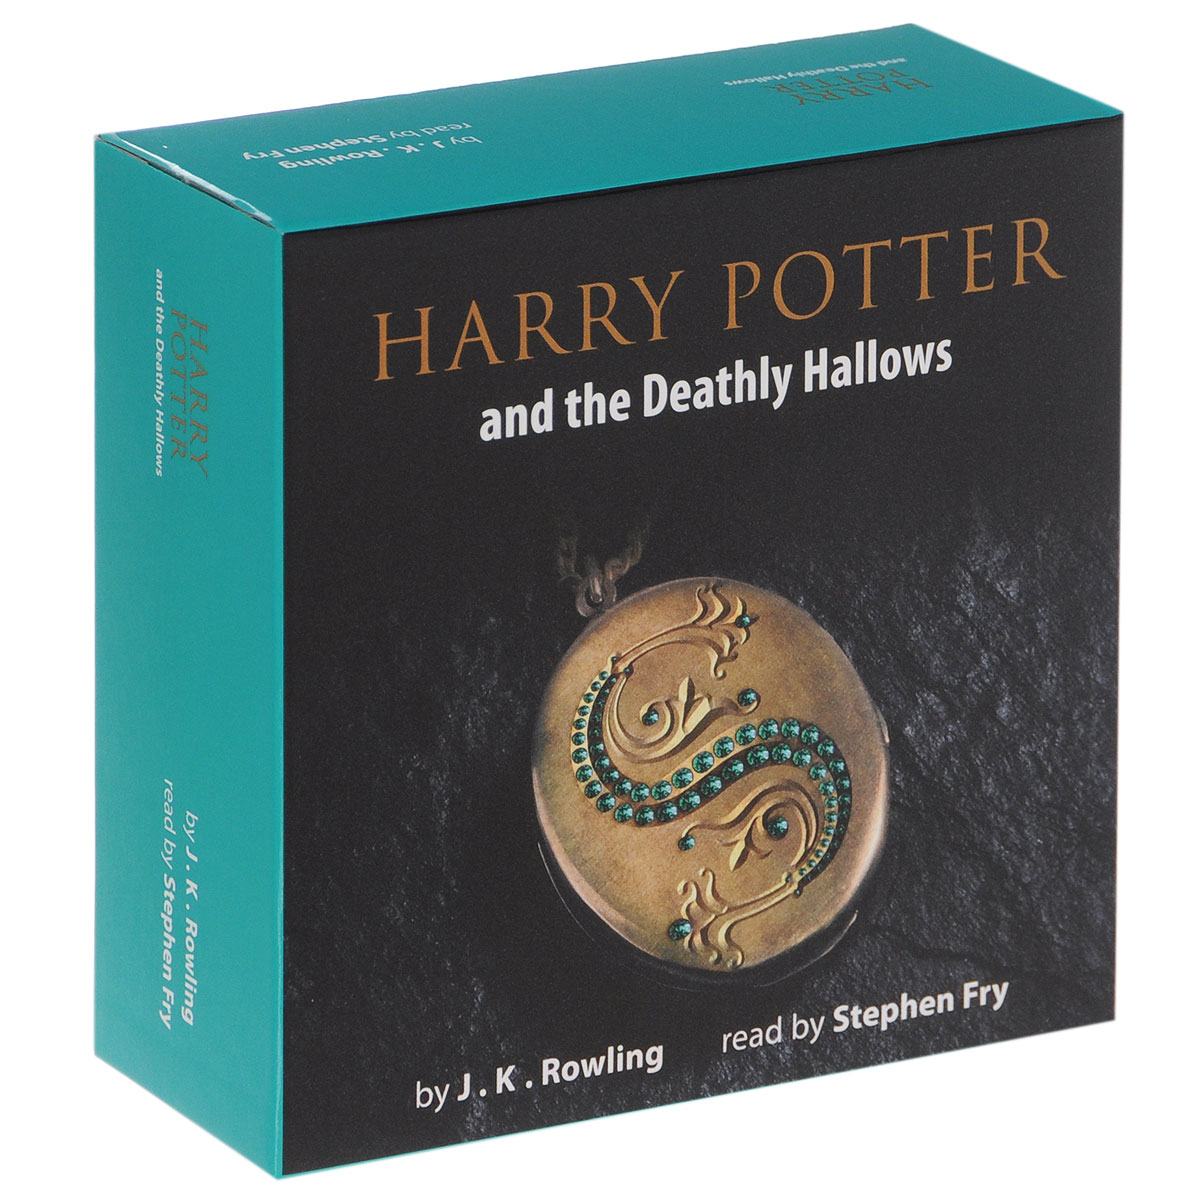 Harry Potter and the Deathly Hallows (аудиокнига на 20 CD)